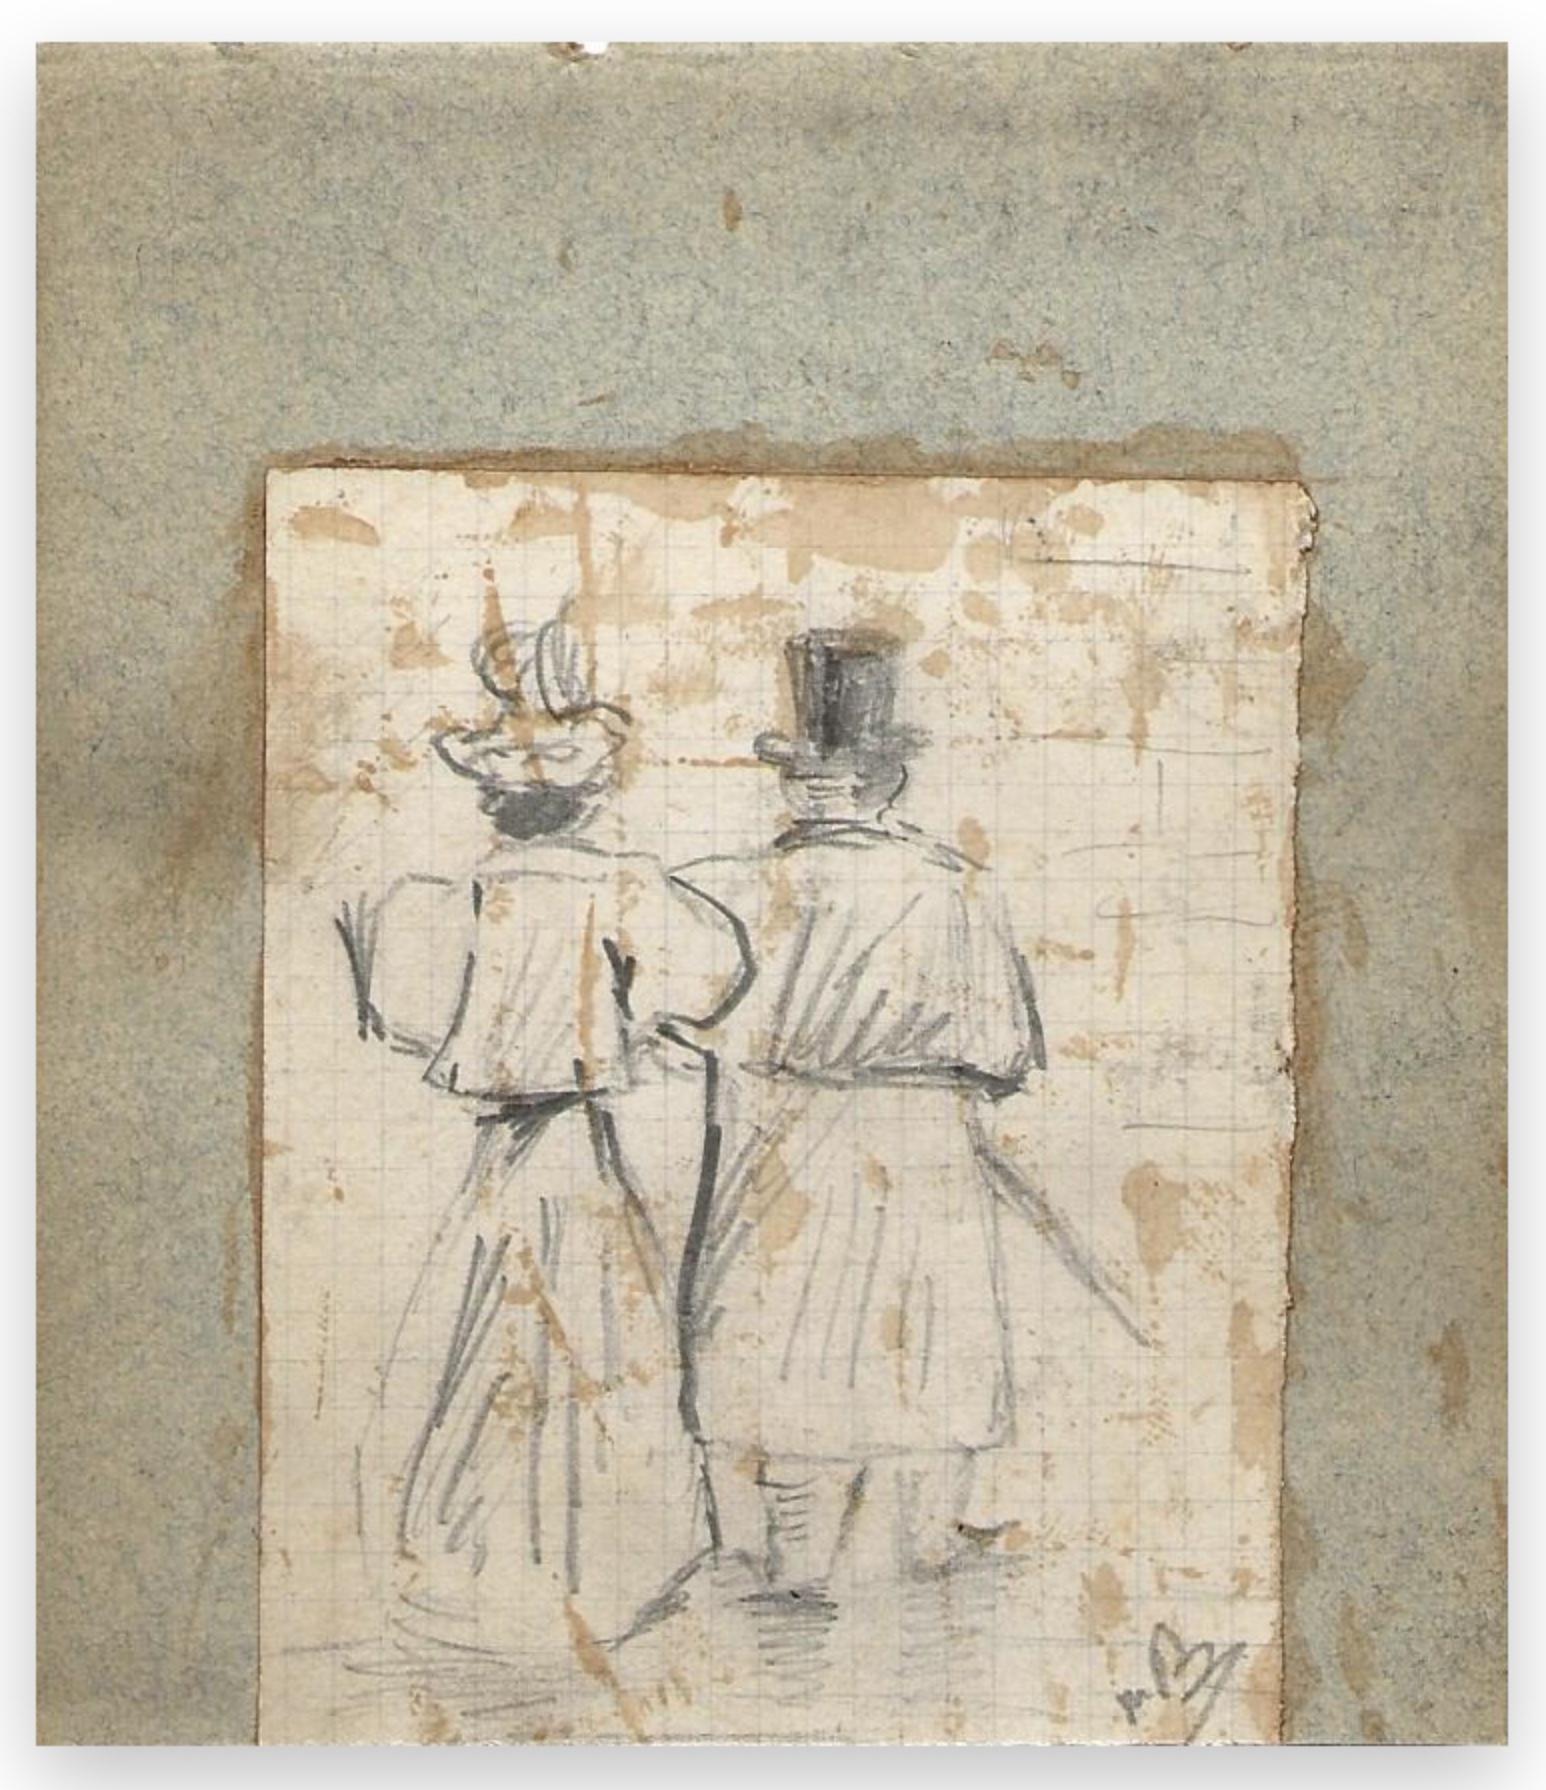 Etienne Omer Wauquier Figurative Art - Couple in Hat Walking from Behind - Pencil by Wauquier - Mid-19th Century